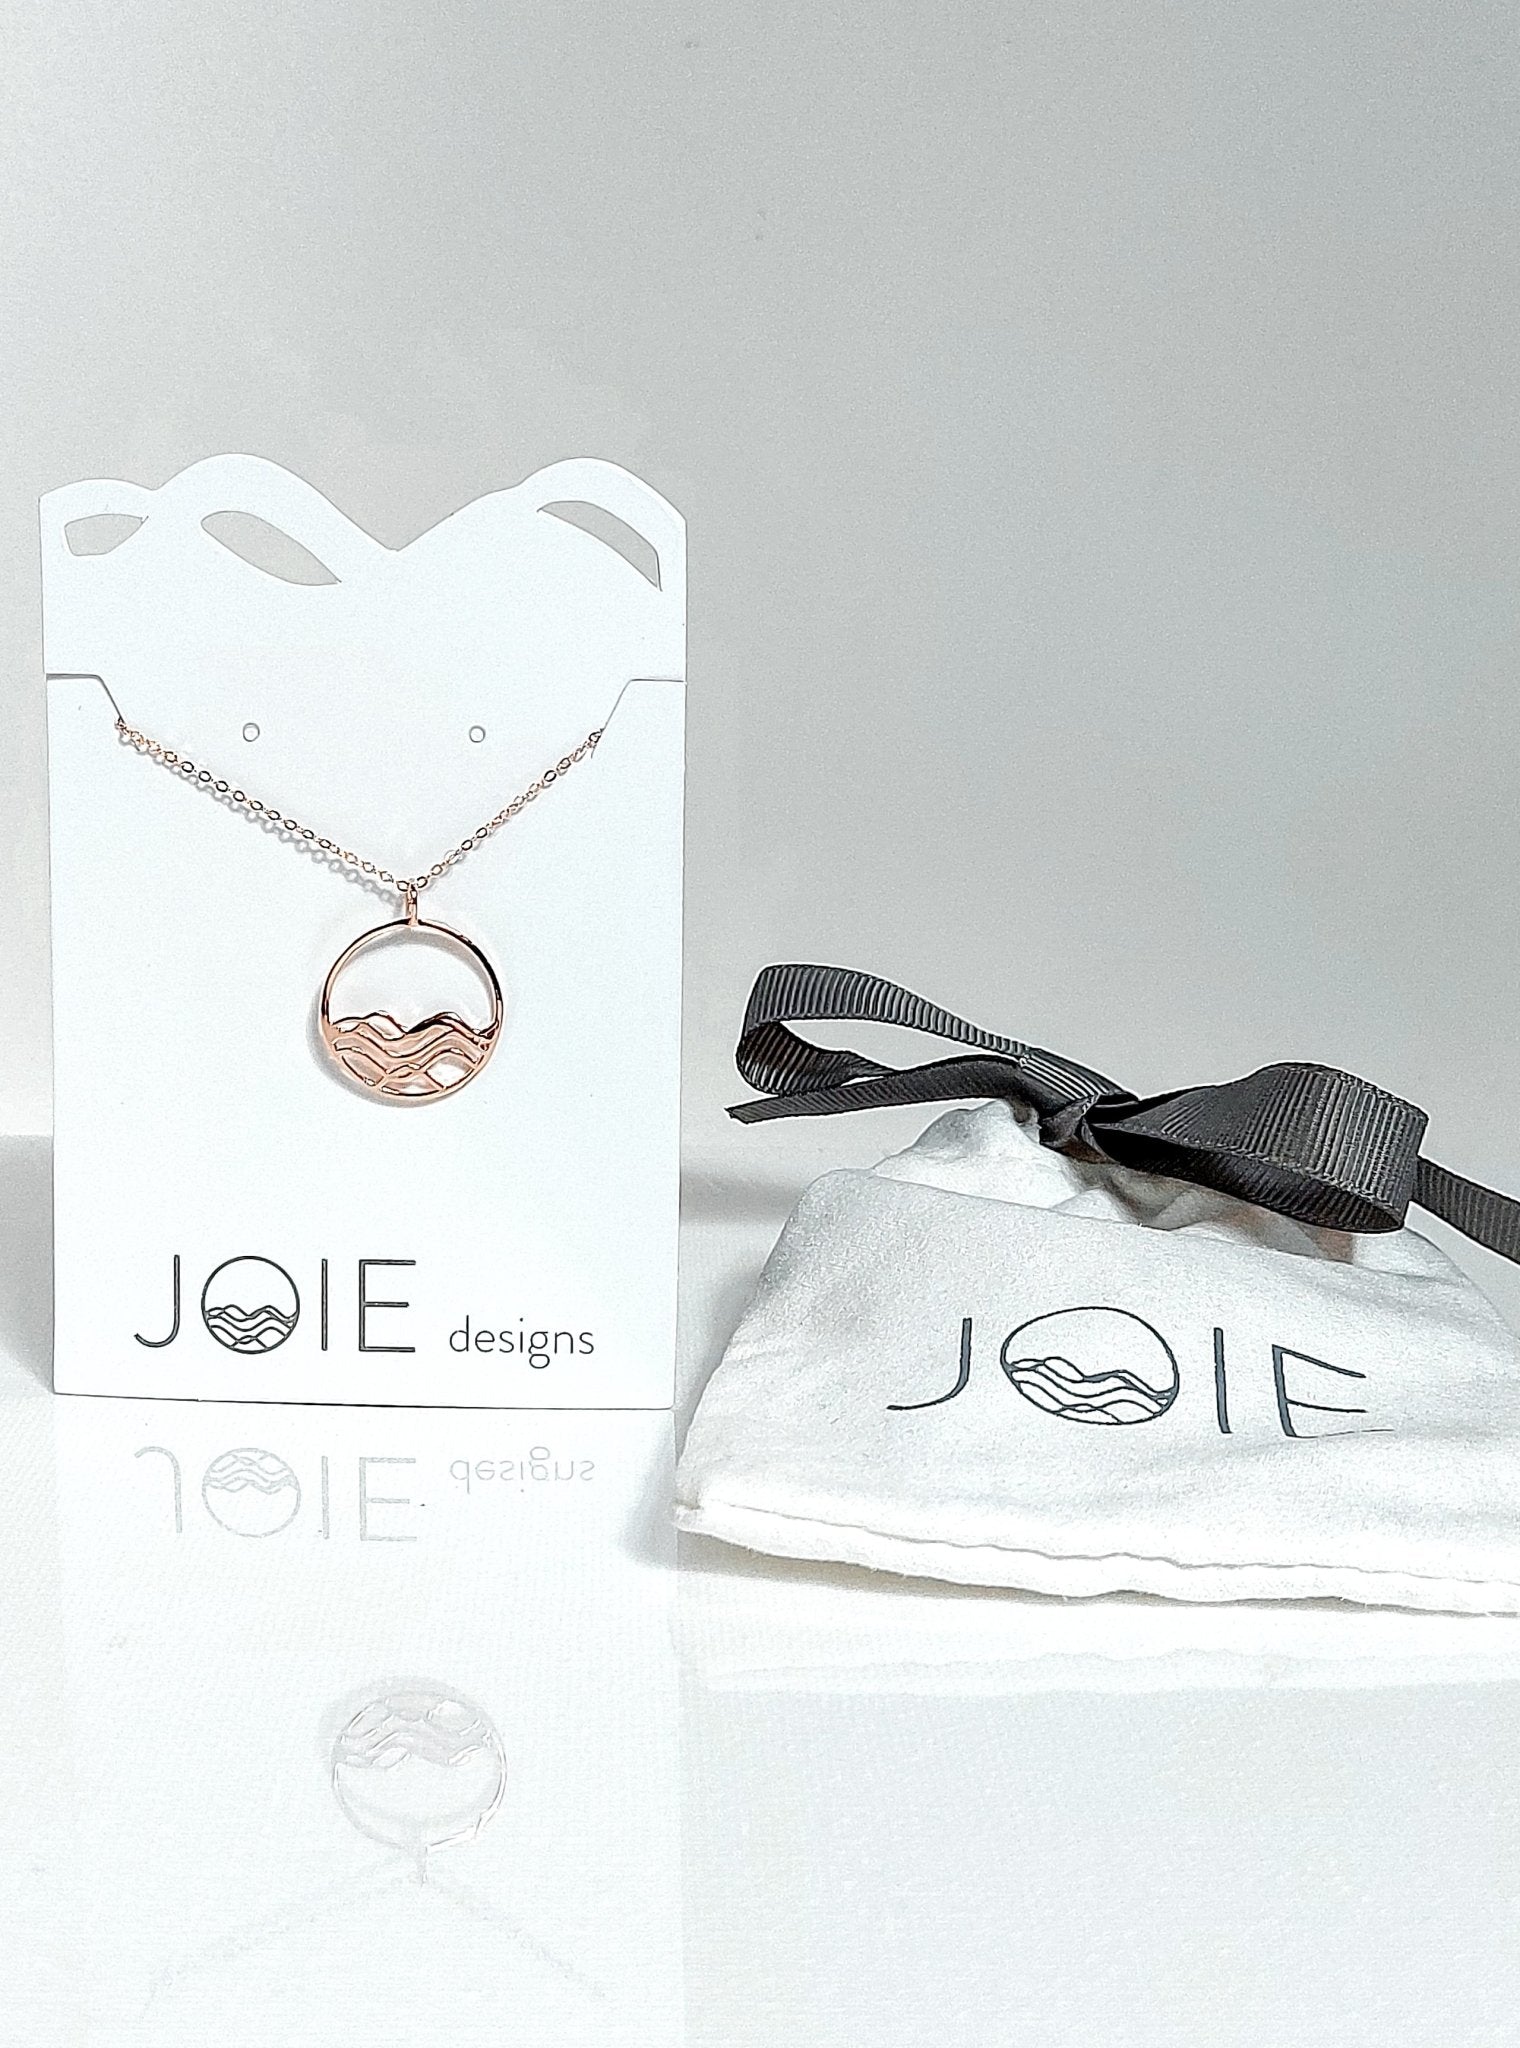 18k rose gold plated petite high tide circle pendant necklace on a white jewelry card with matching faux suede bag.